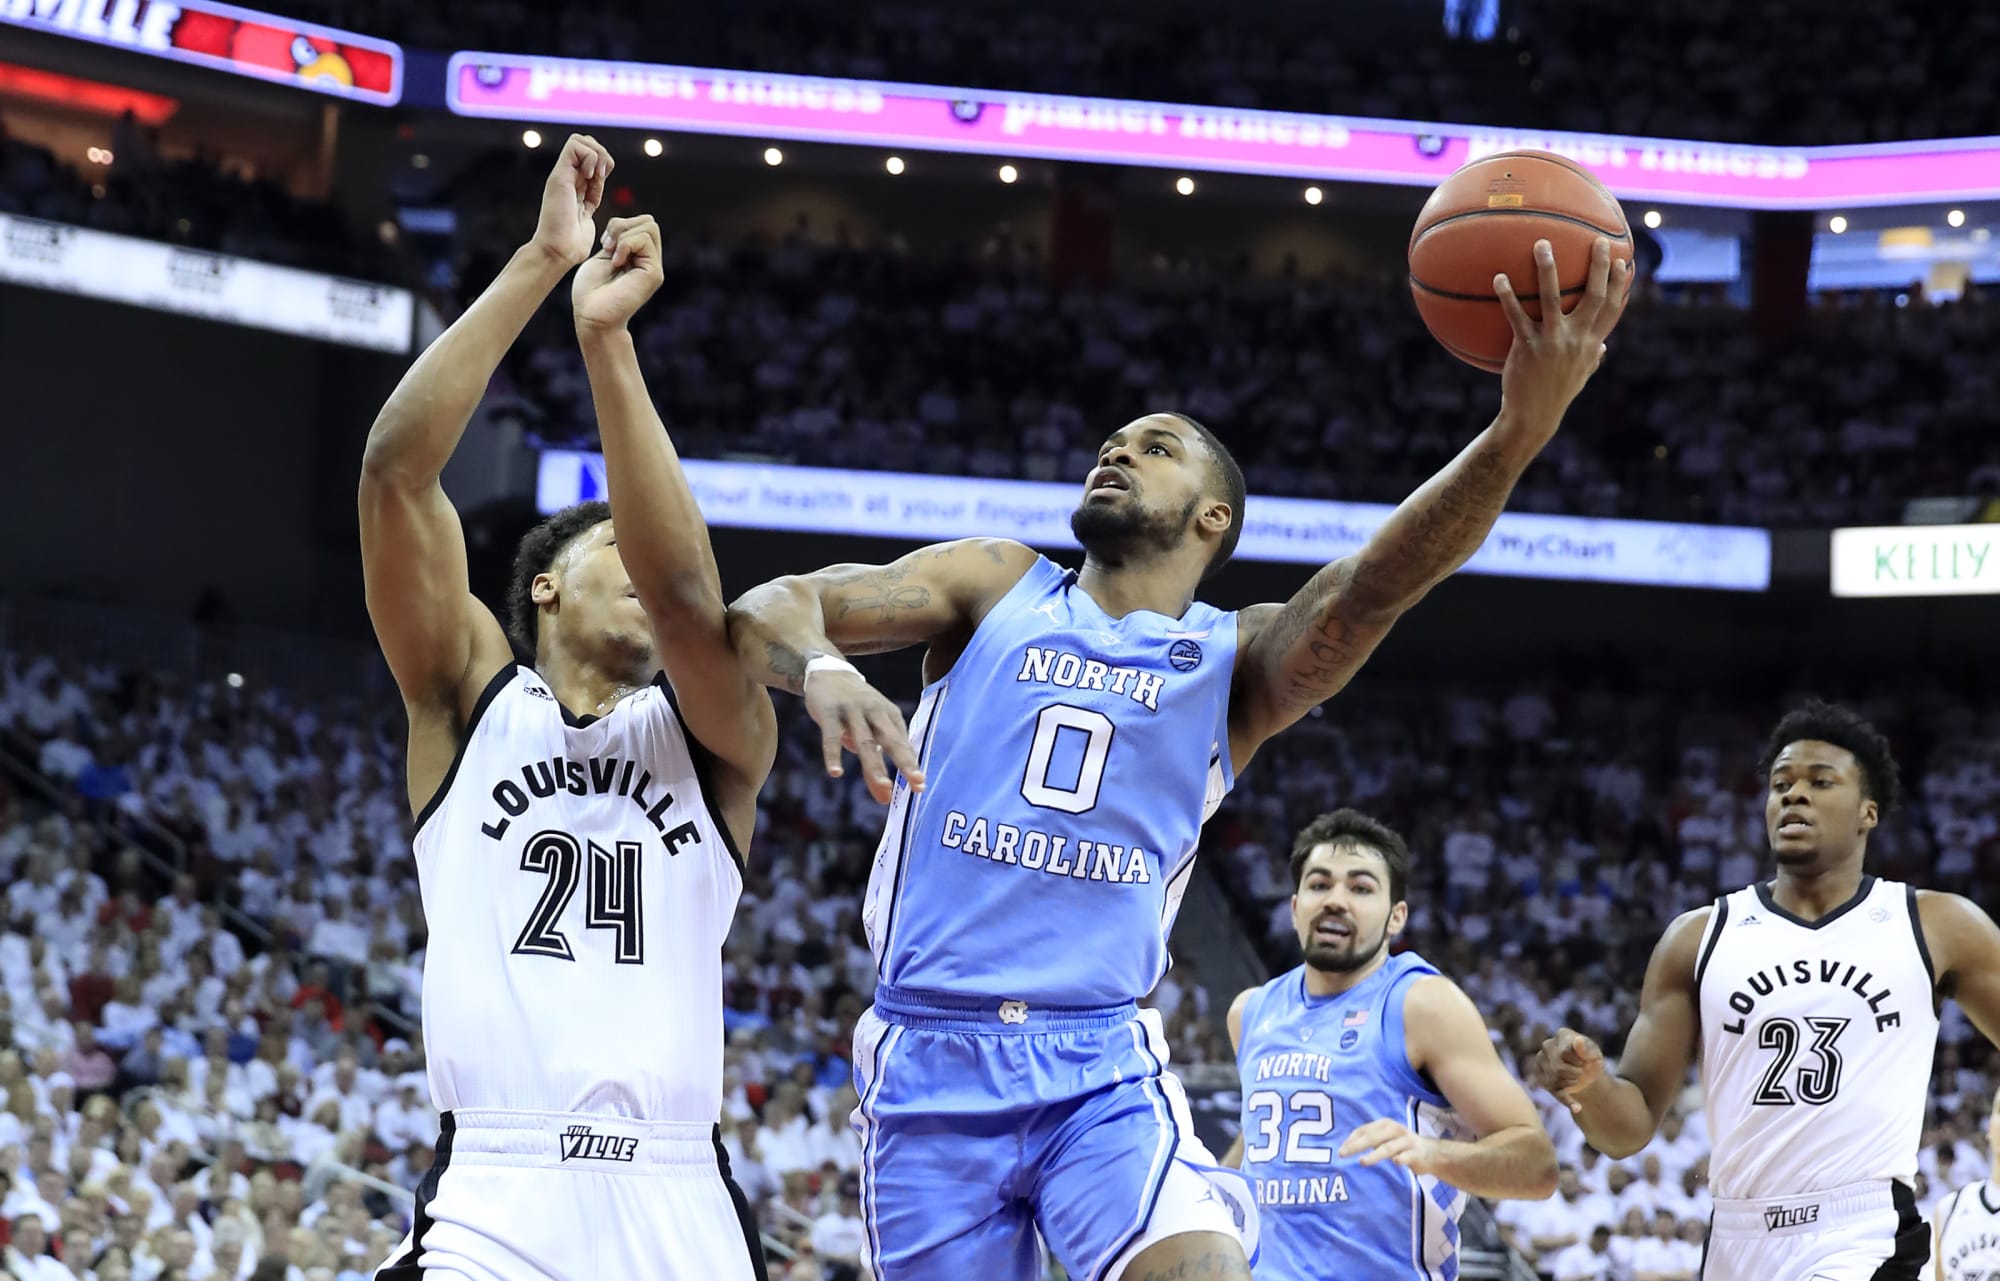 UNC Basketball: Seventh Woods 2018-19 season in review